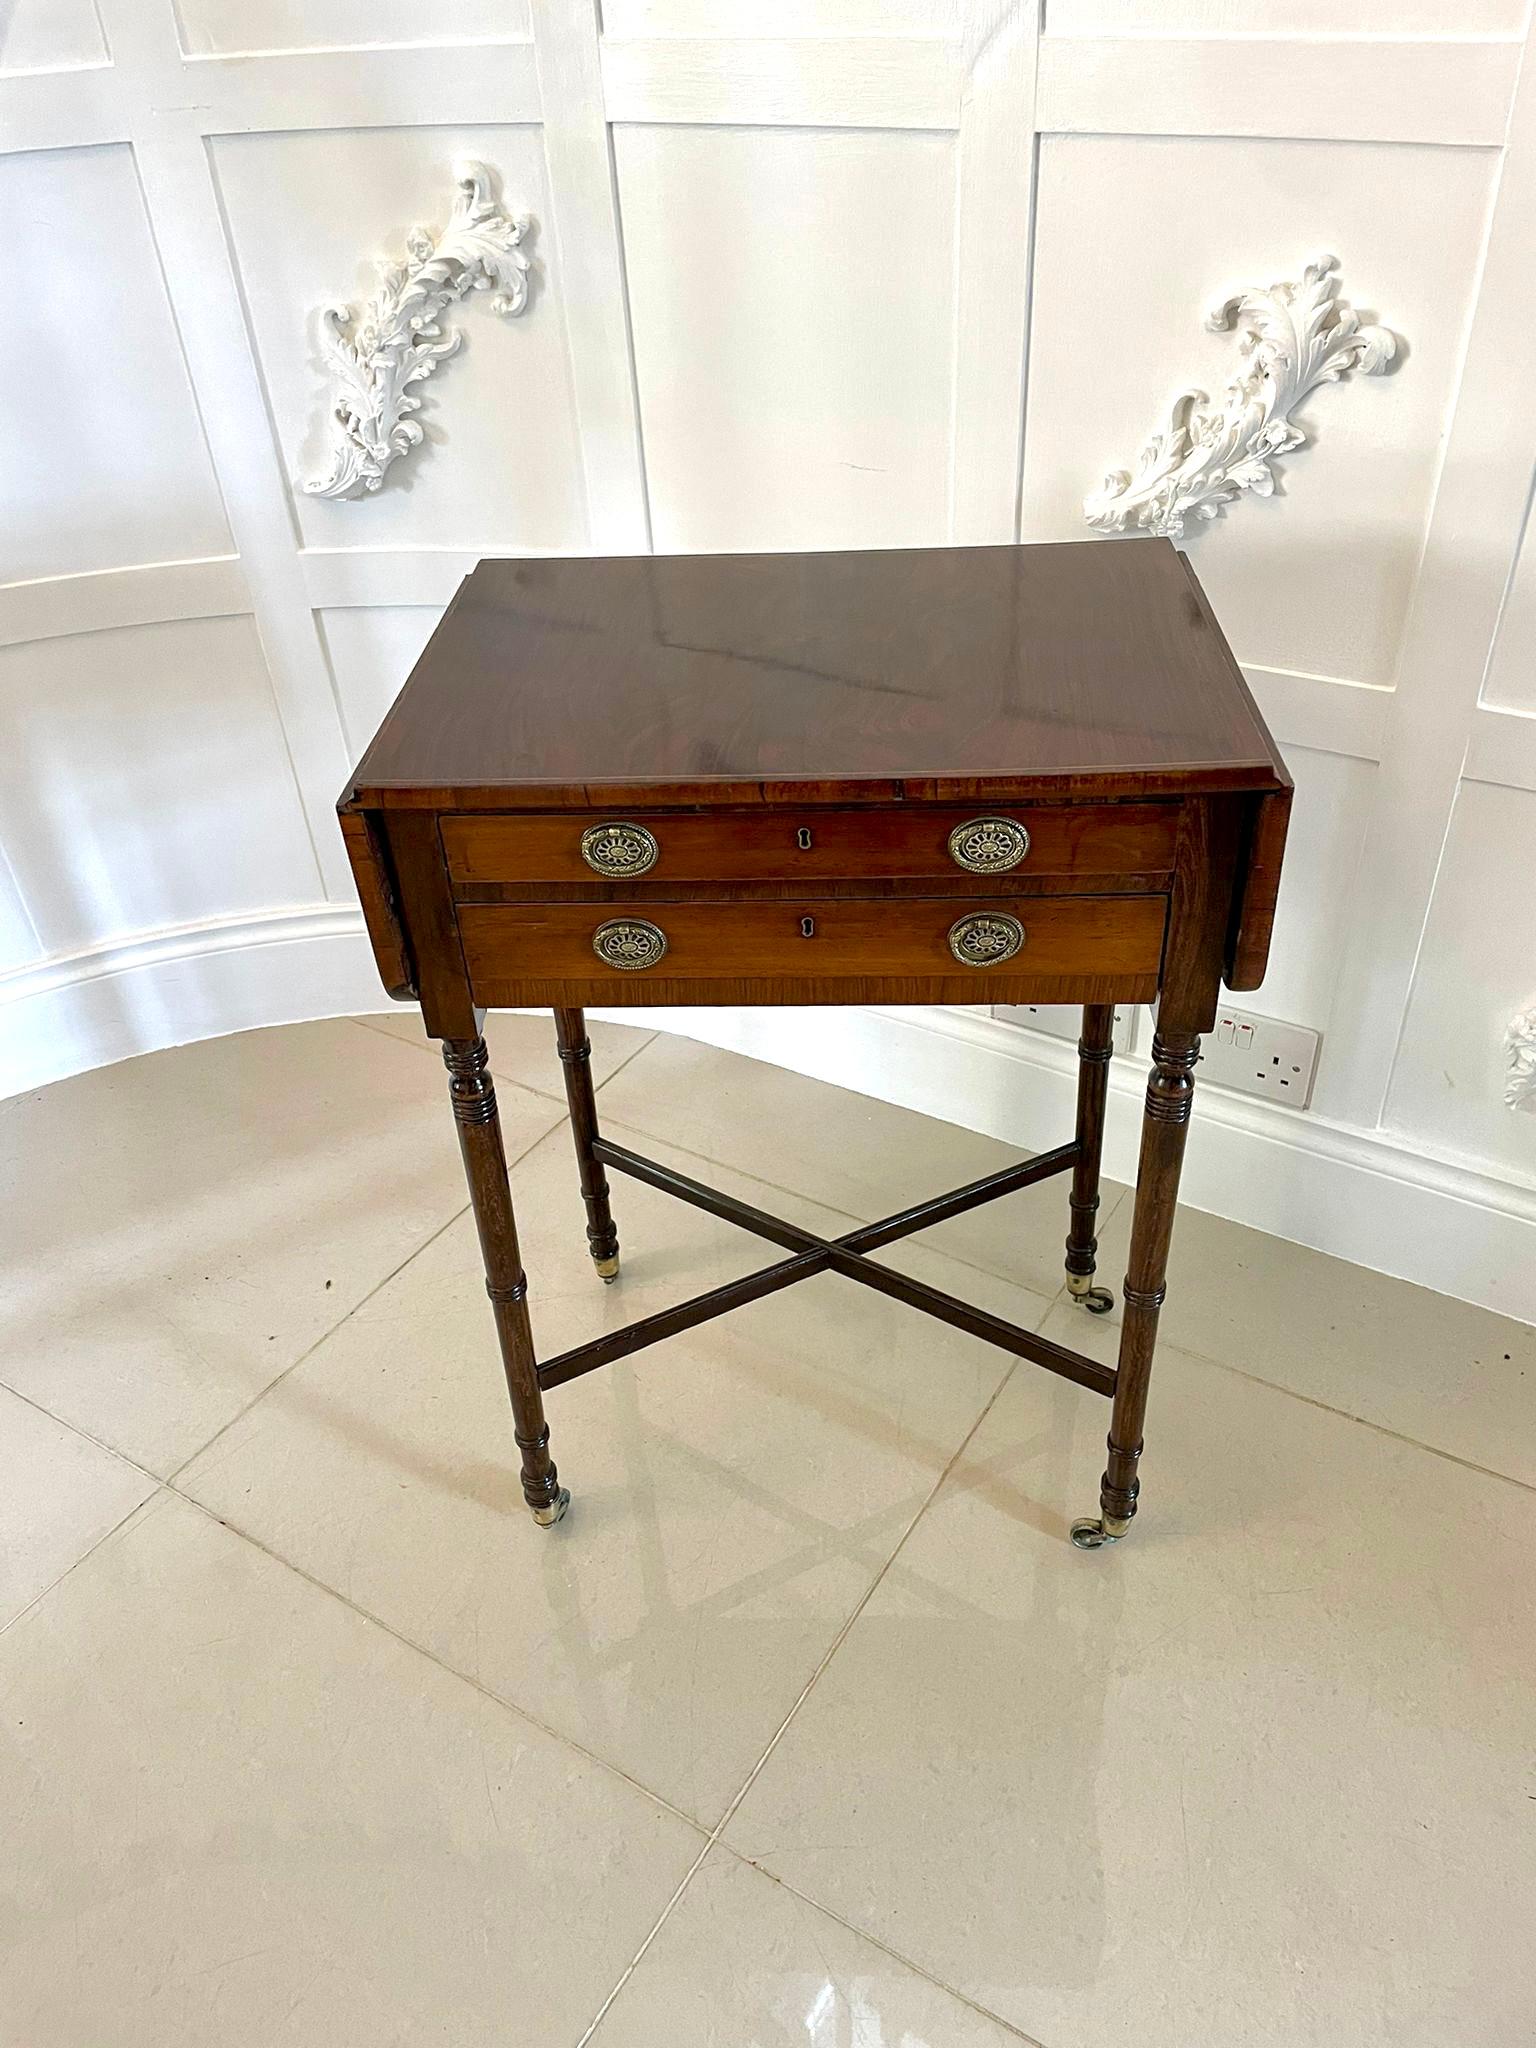 Antique Regency quality rosewood freestanding drop leaf lamp table having a quality rosewood top with two drop leaves and satinwood stringing, two drawers with original ornate oval brass handles containing the makers label Druce & Co. London,